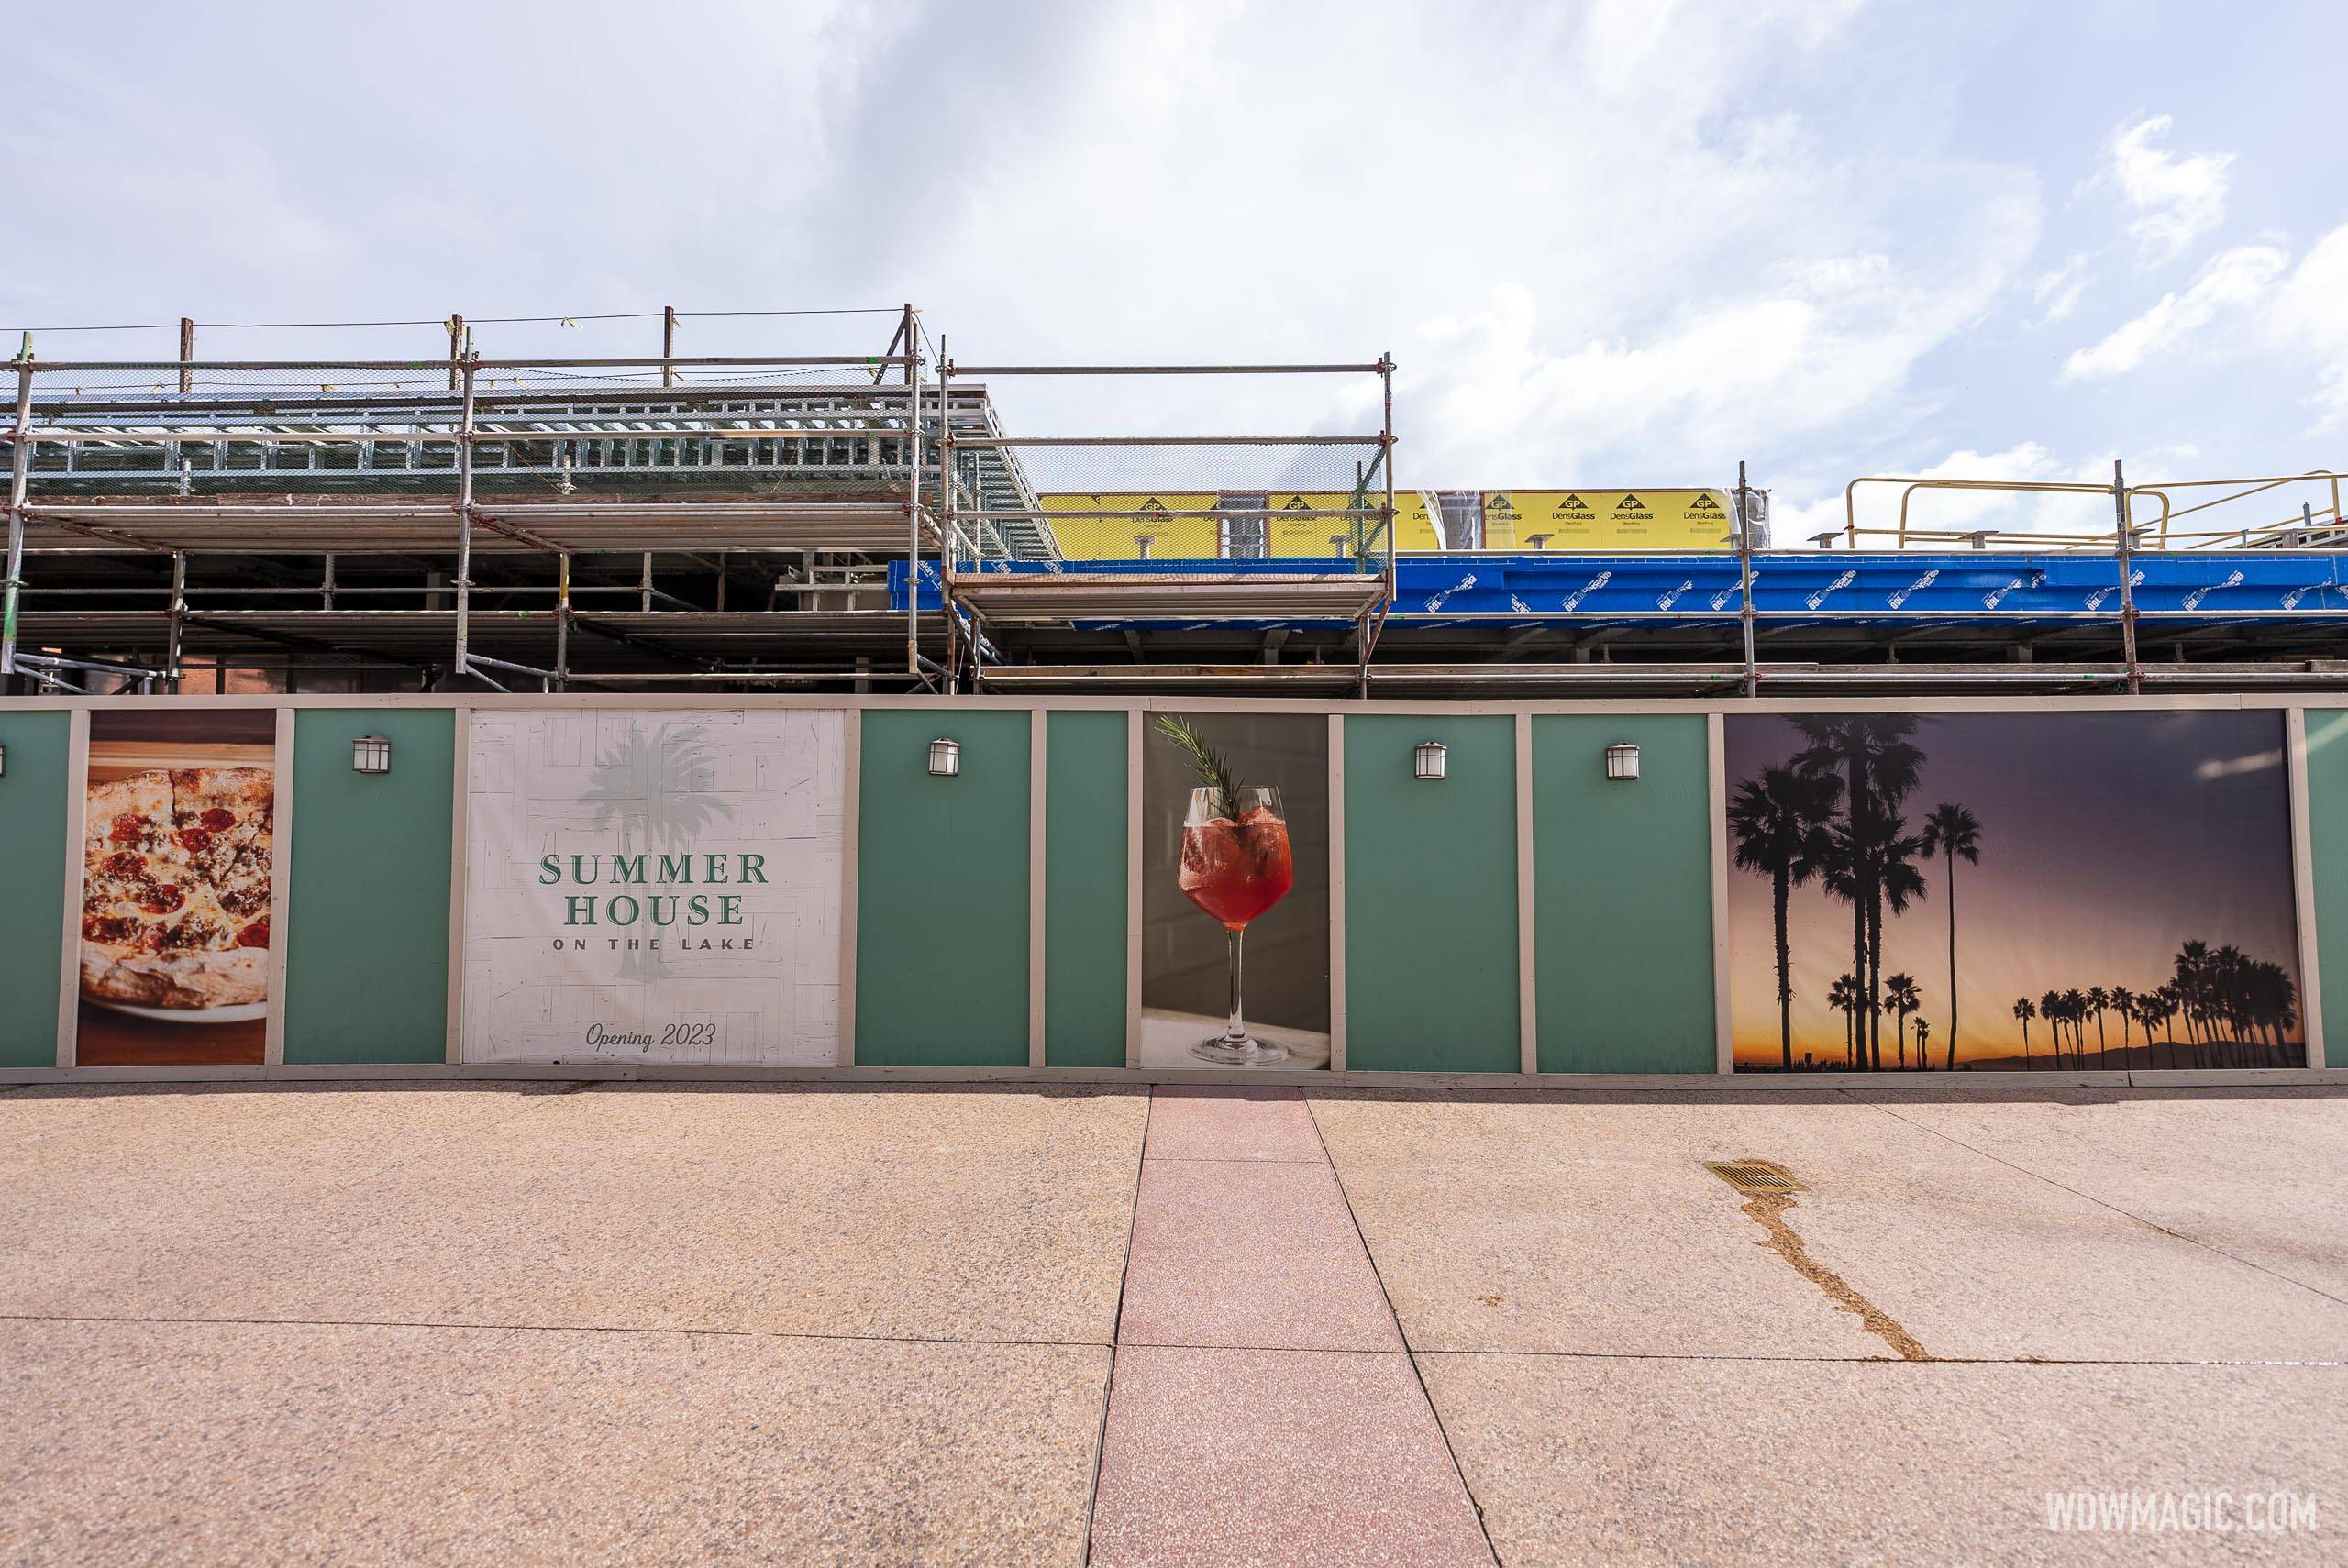 Latest look at construction progress on 'Summer House on the Lake' at Disney Springs